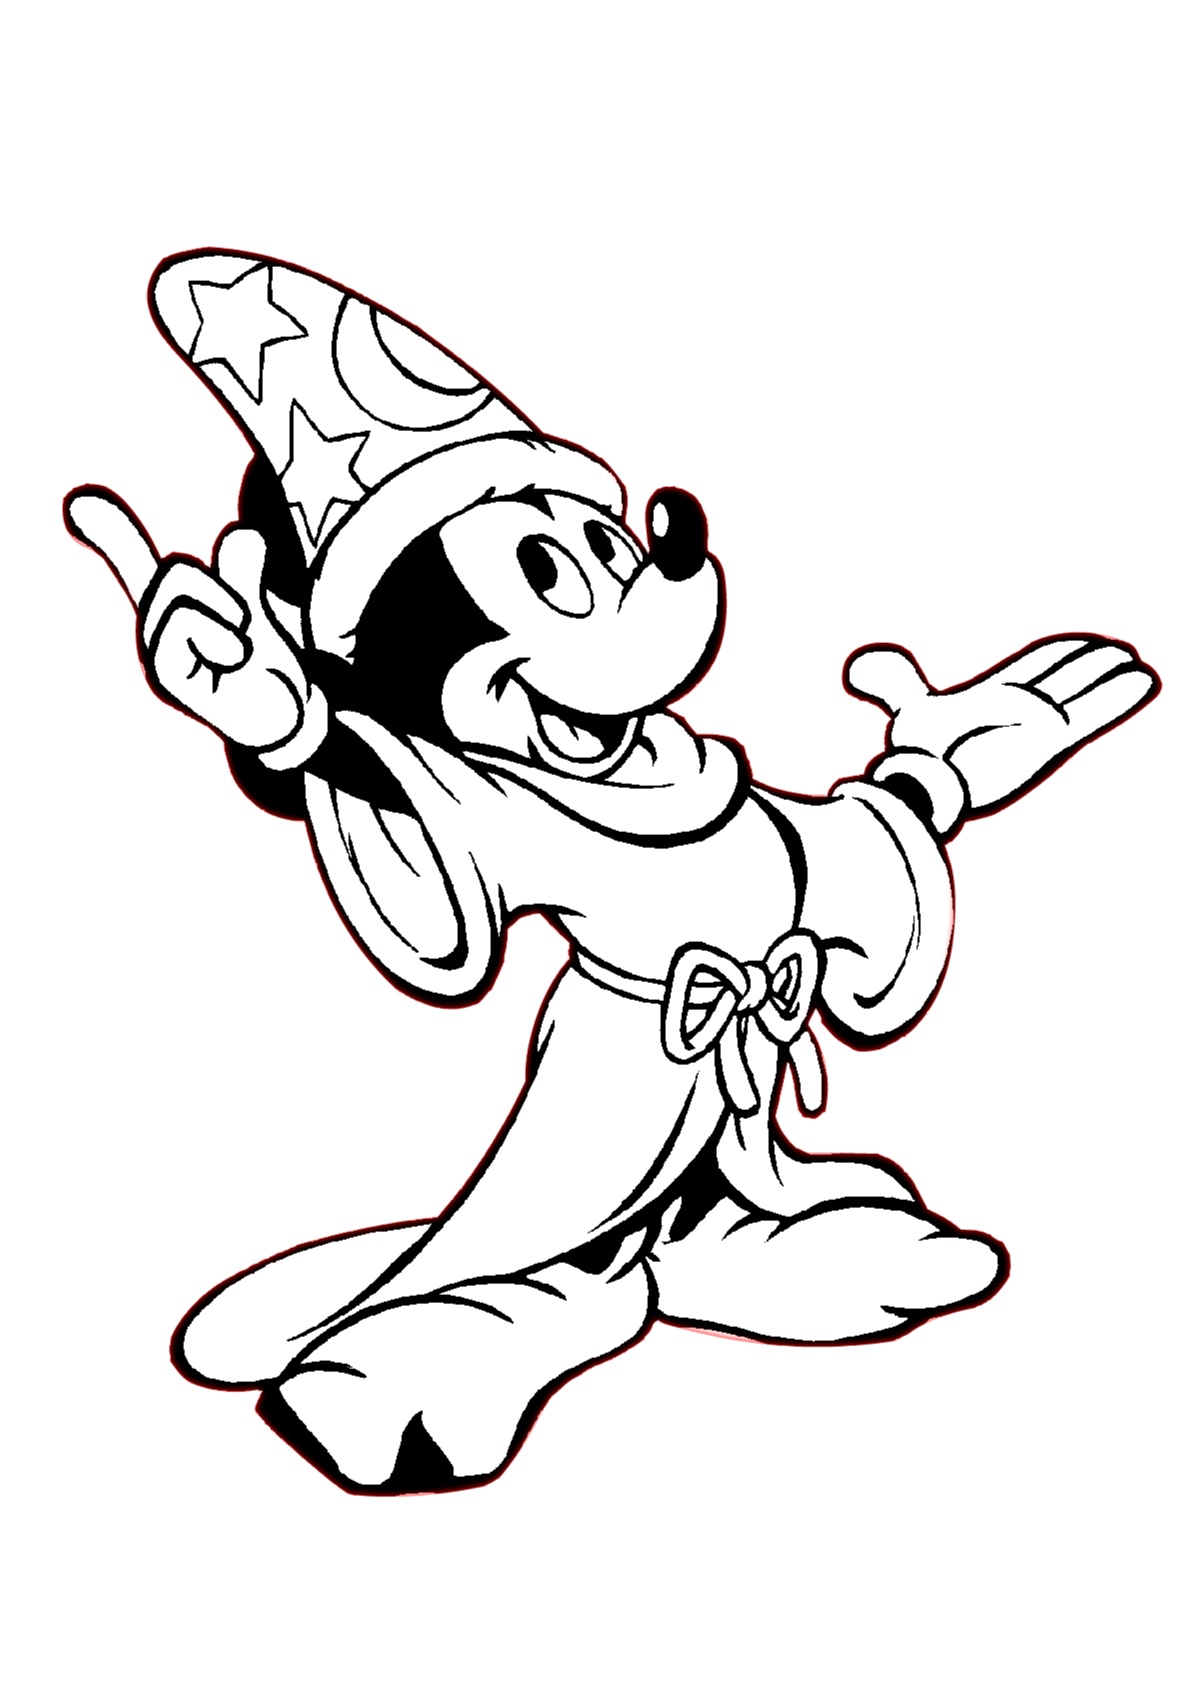 Mickey Mouse Magician Coloring Pages for Kids - Print Color Craft